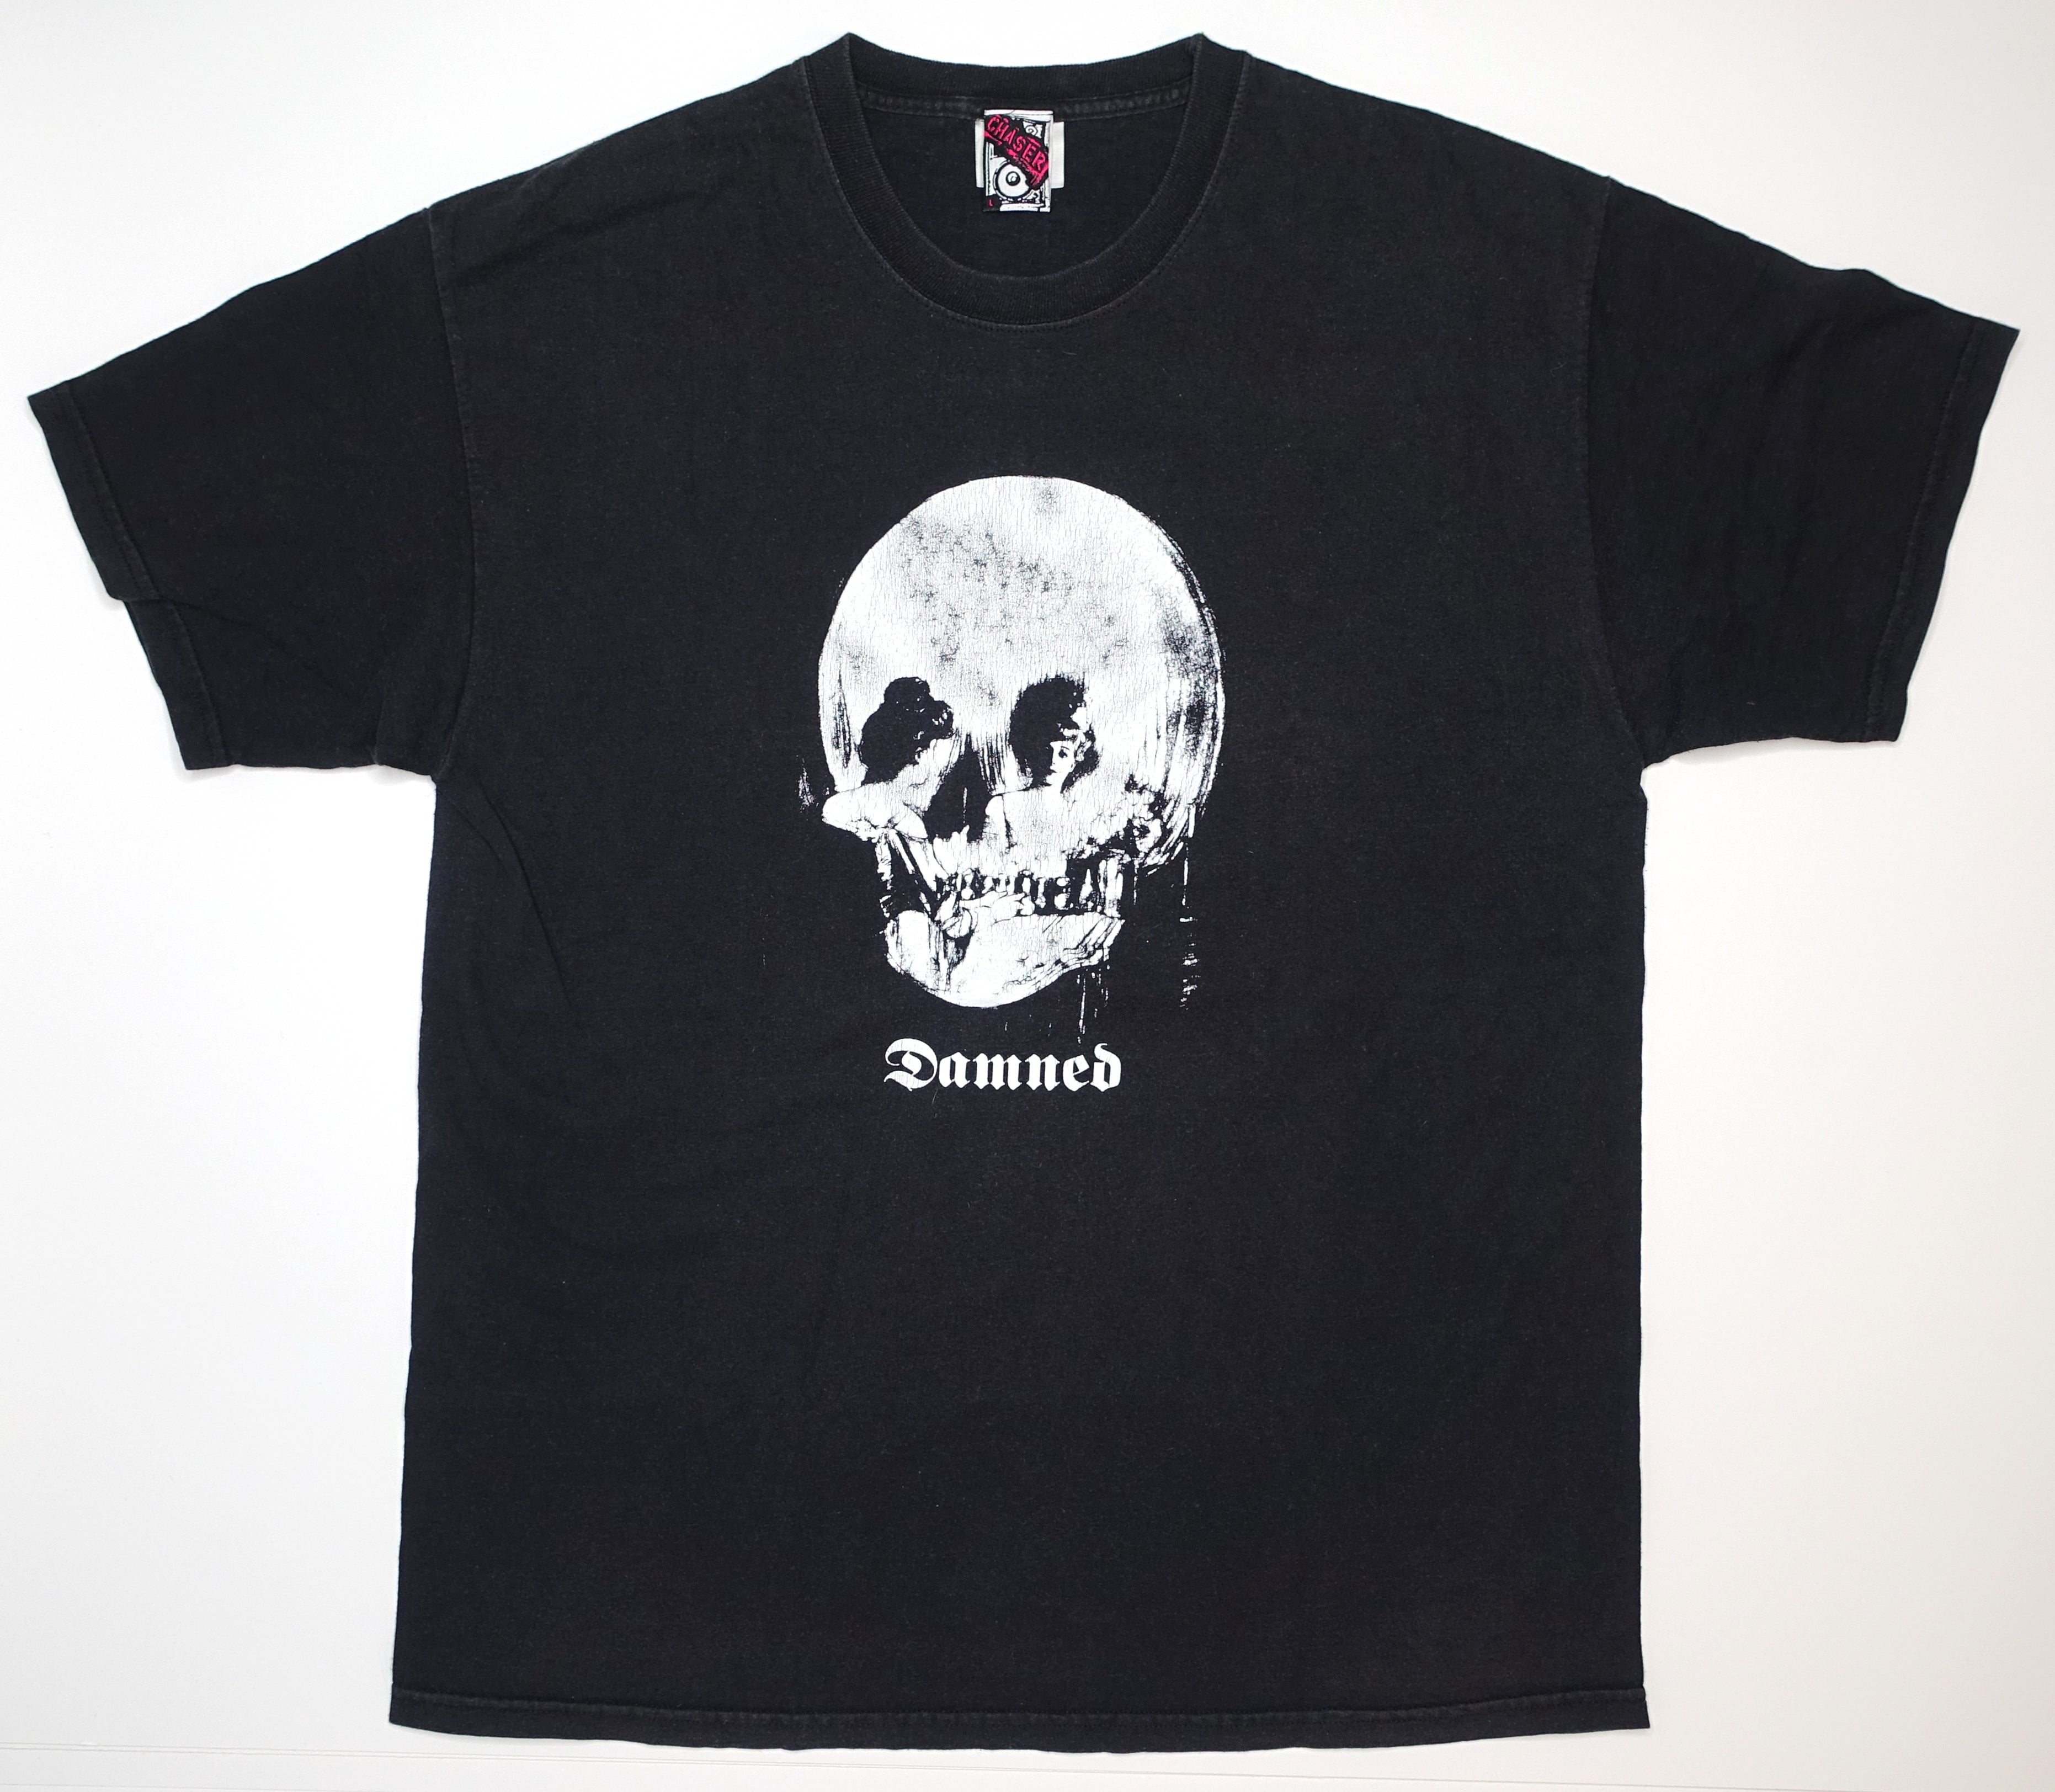 the Damned - Stretcher Case Baby 90's Shirt Size XL